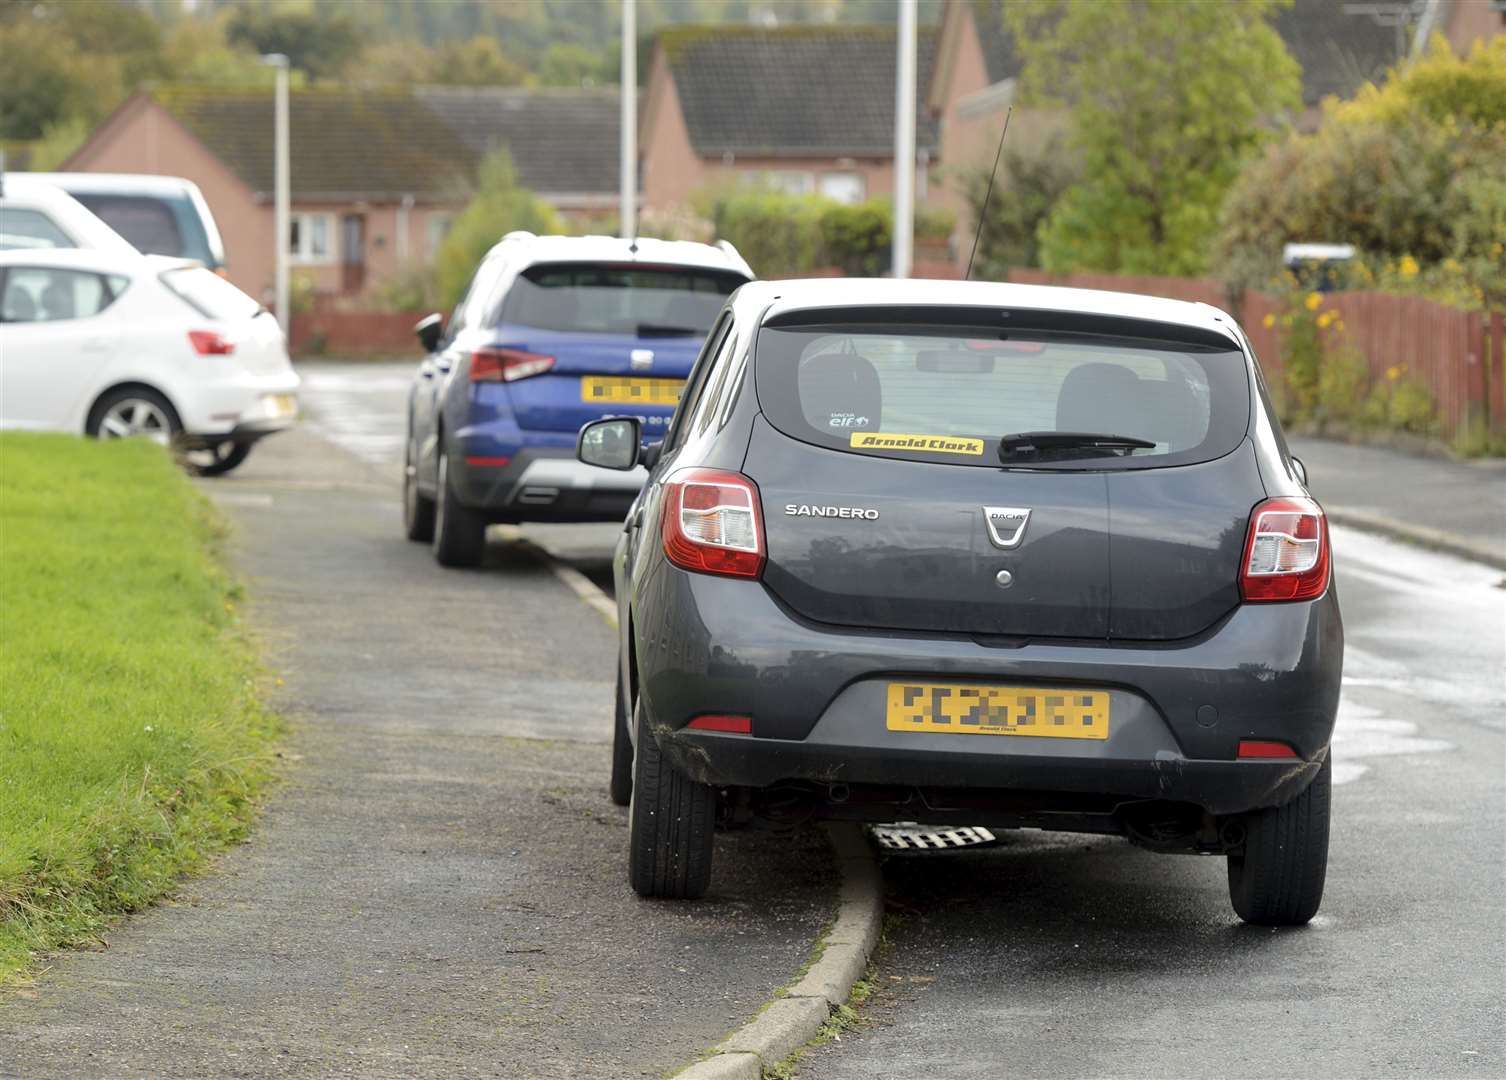 Parking on the pavement is now an offence which could result in a fine. Picture: James MacKenzie